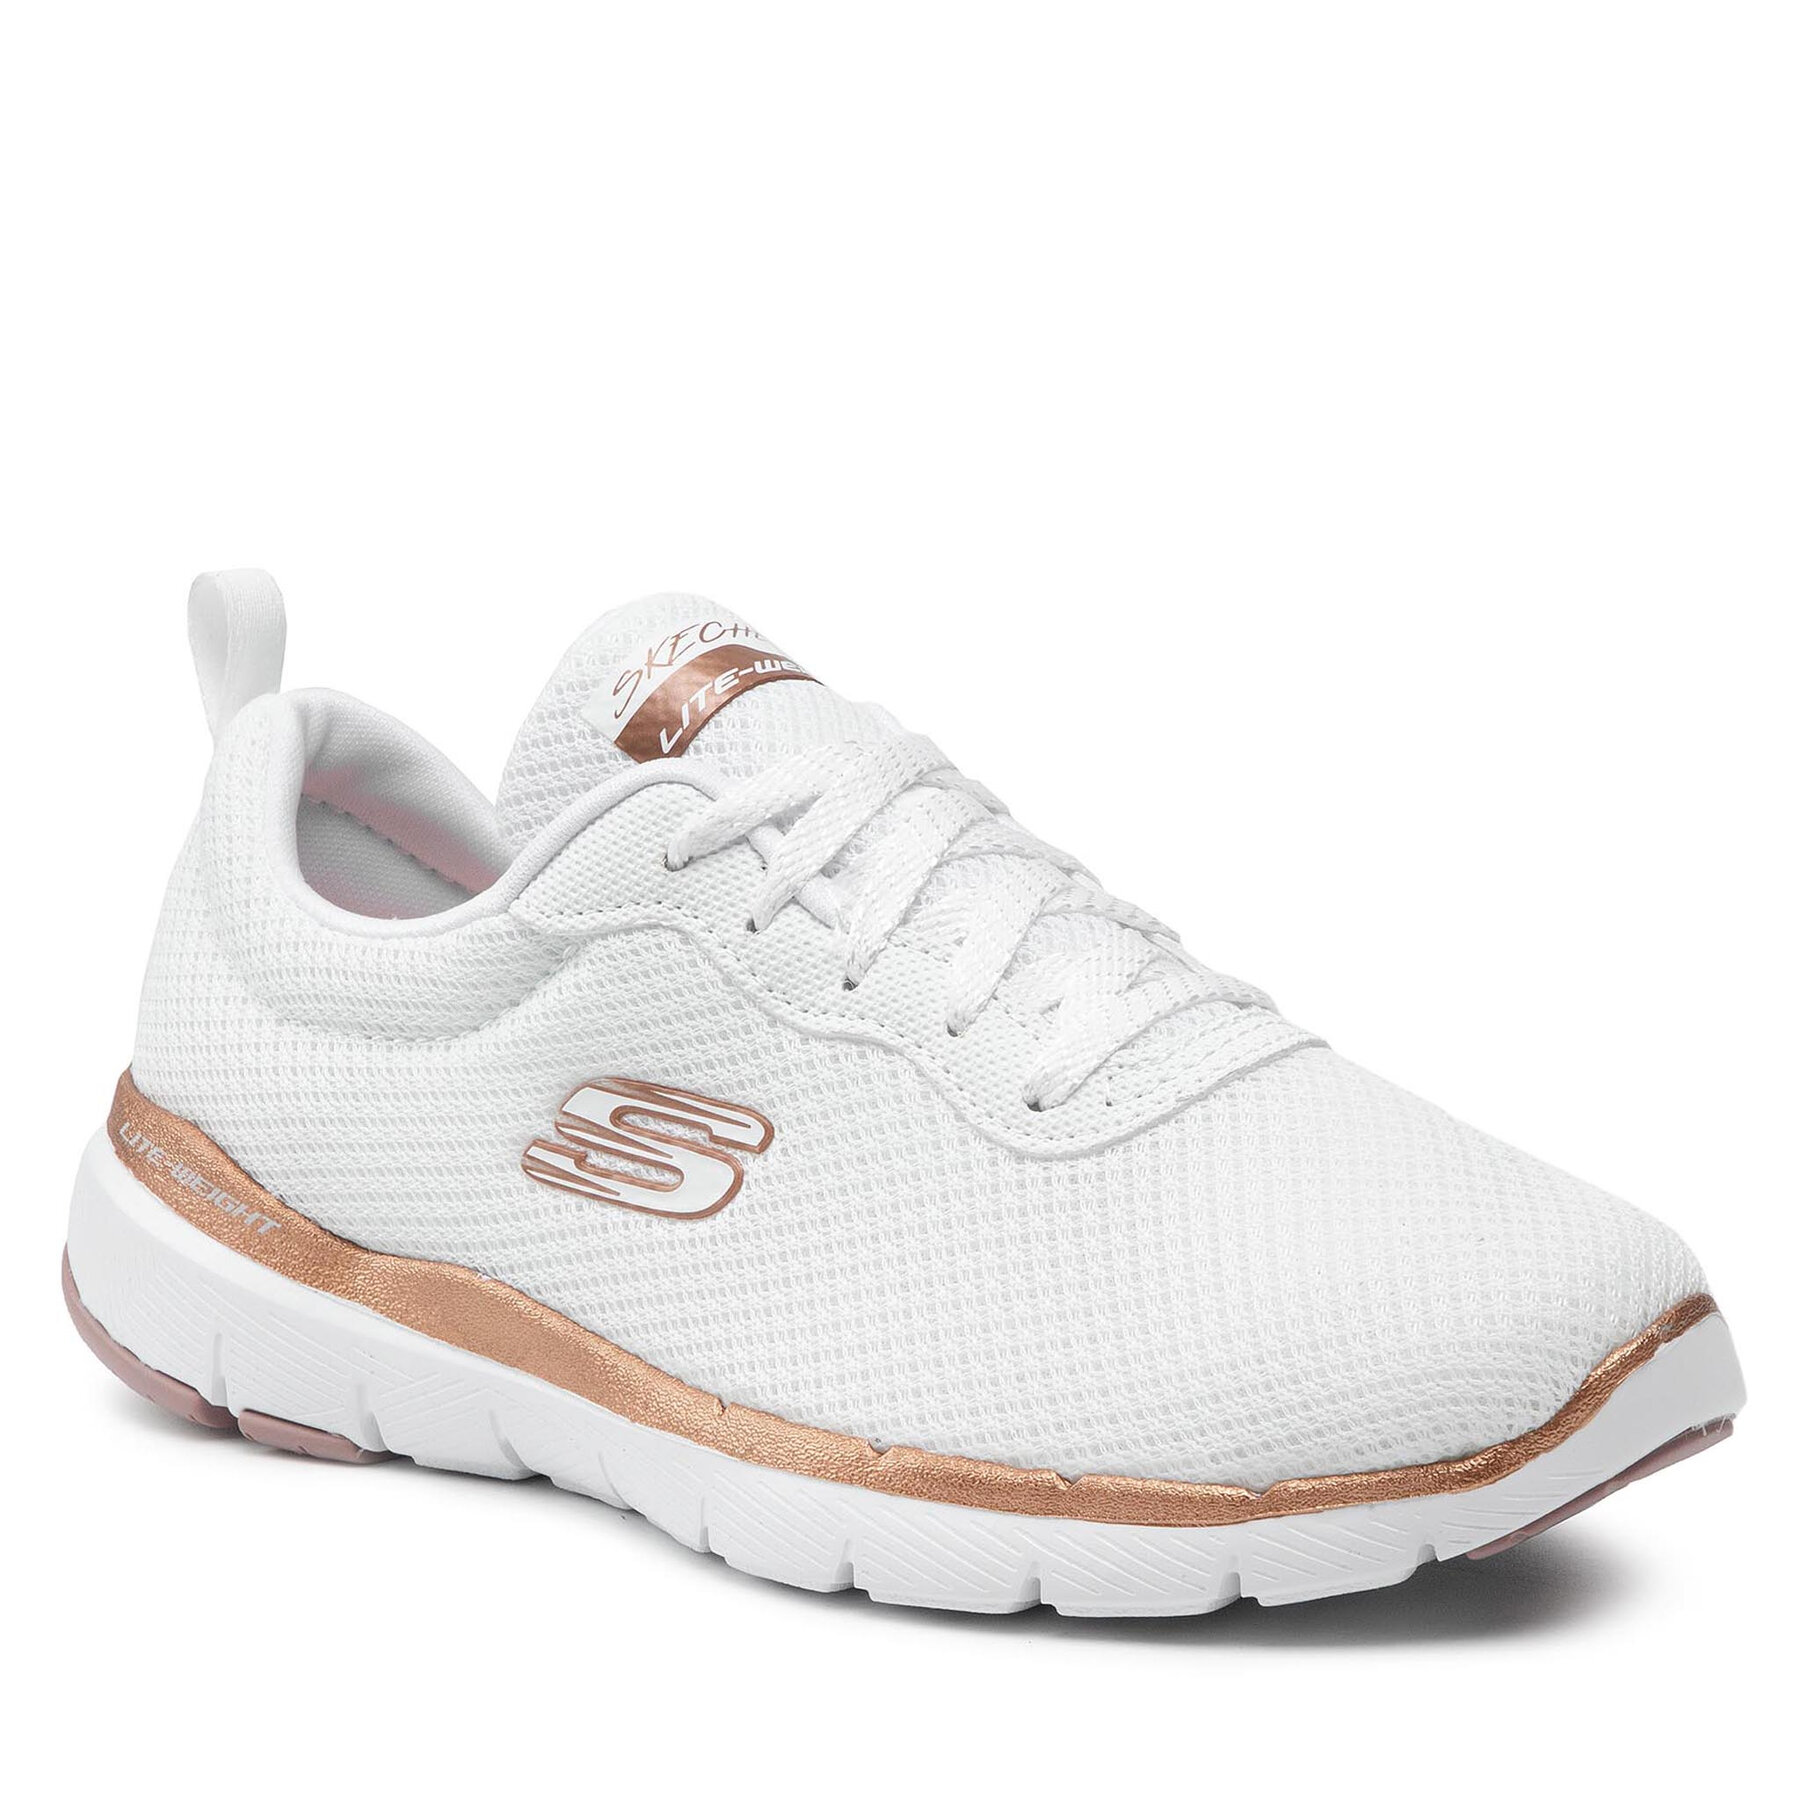 Sneakers Skechers First Insight 13070/WTRG White Rose Gold